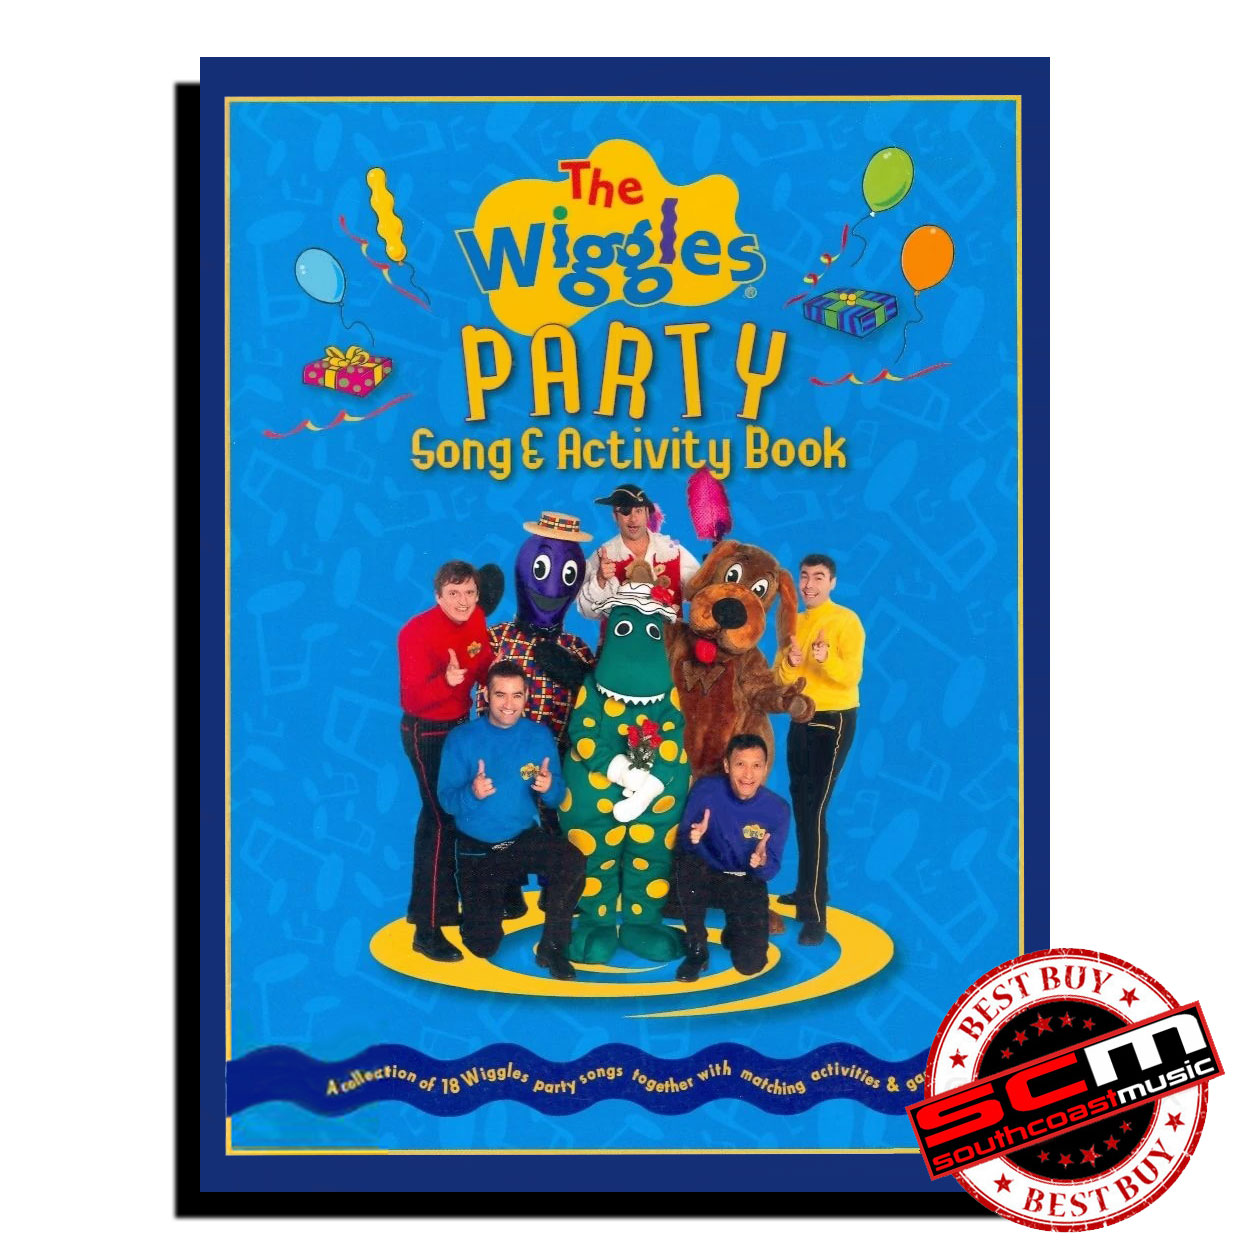 The Wiggles Party Song And Activity Book 40 Pages Of Fun Music For